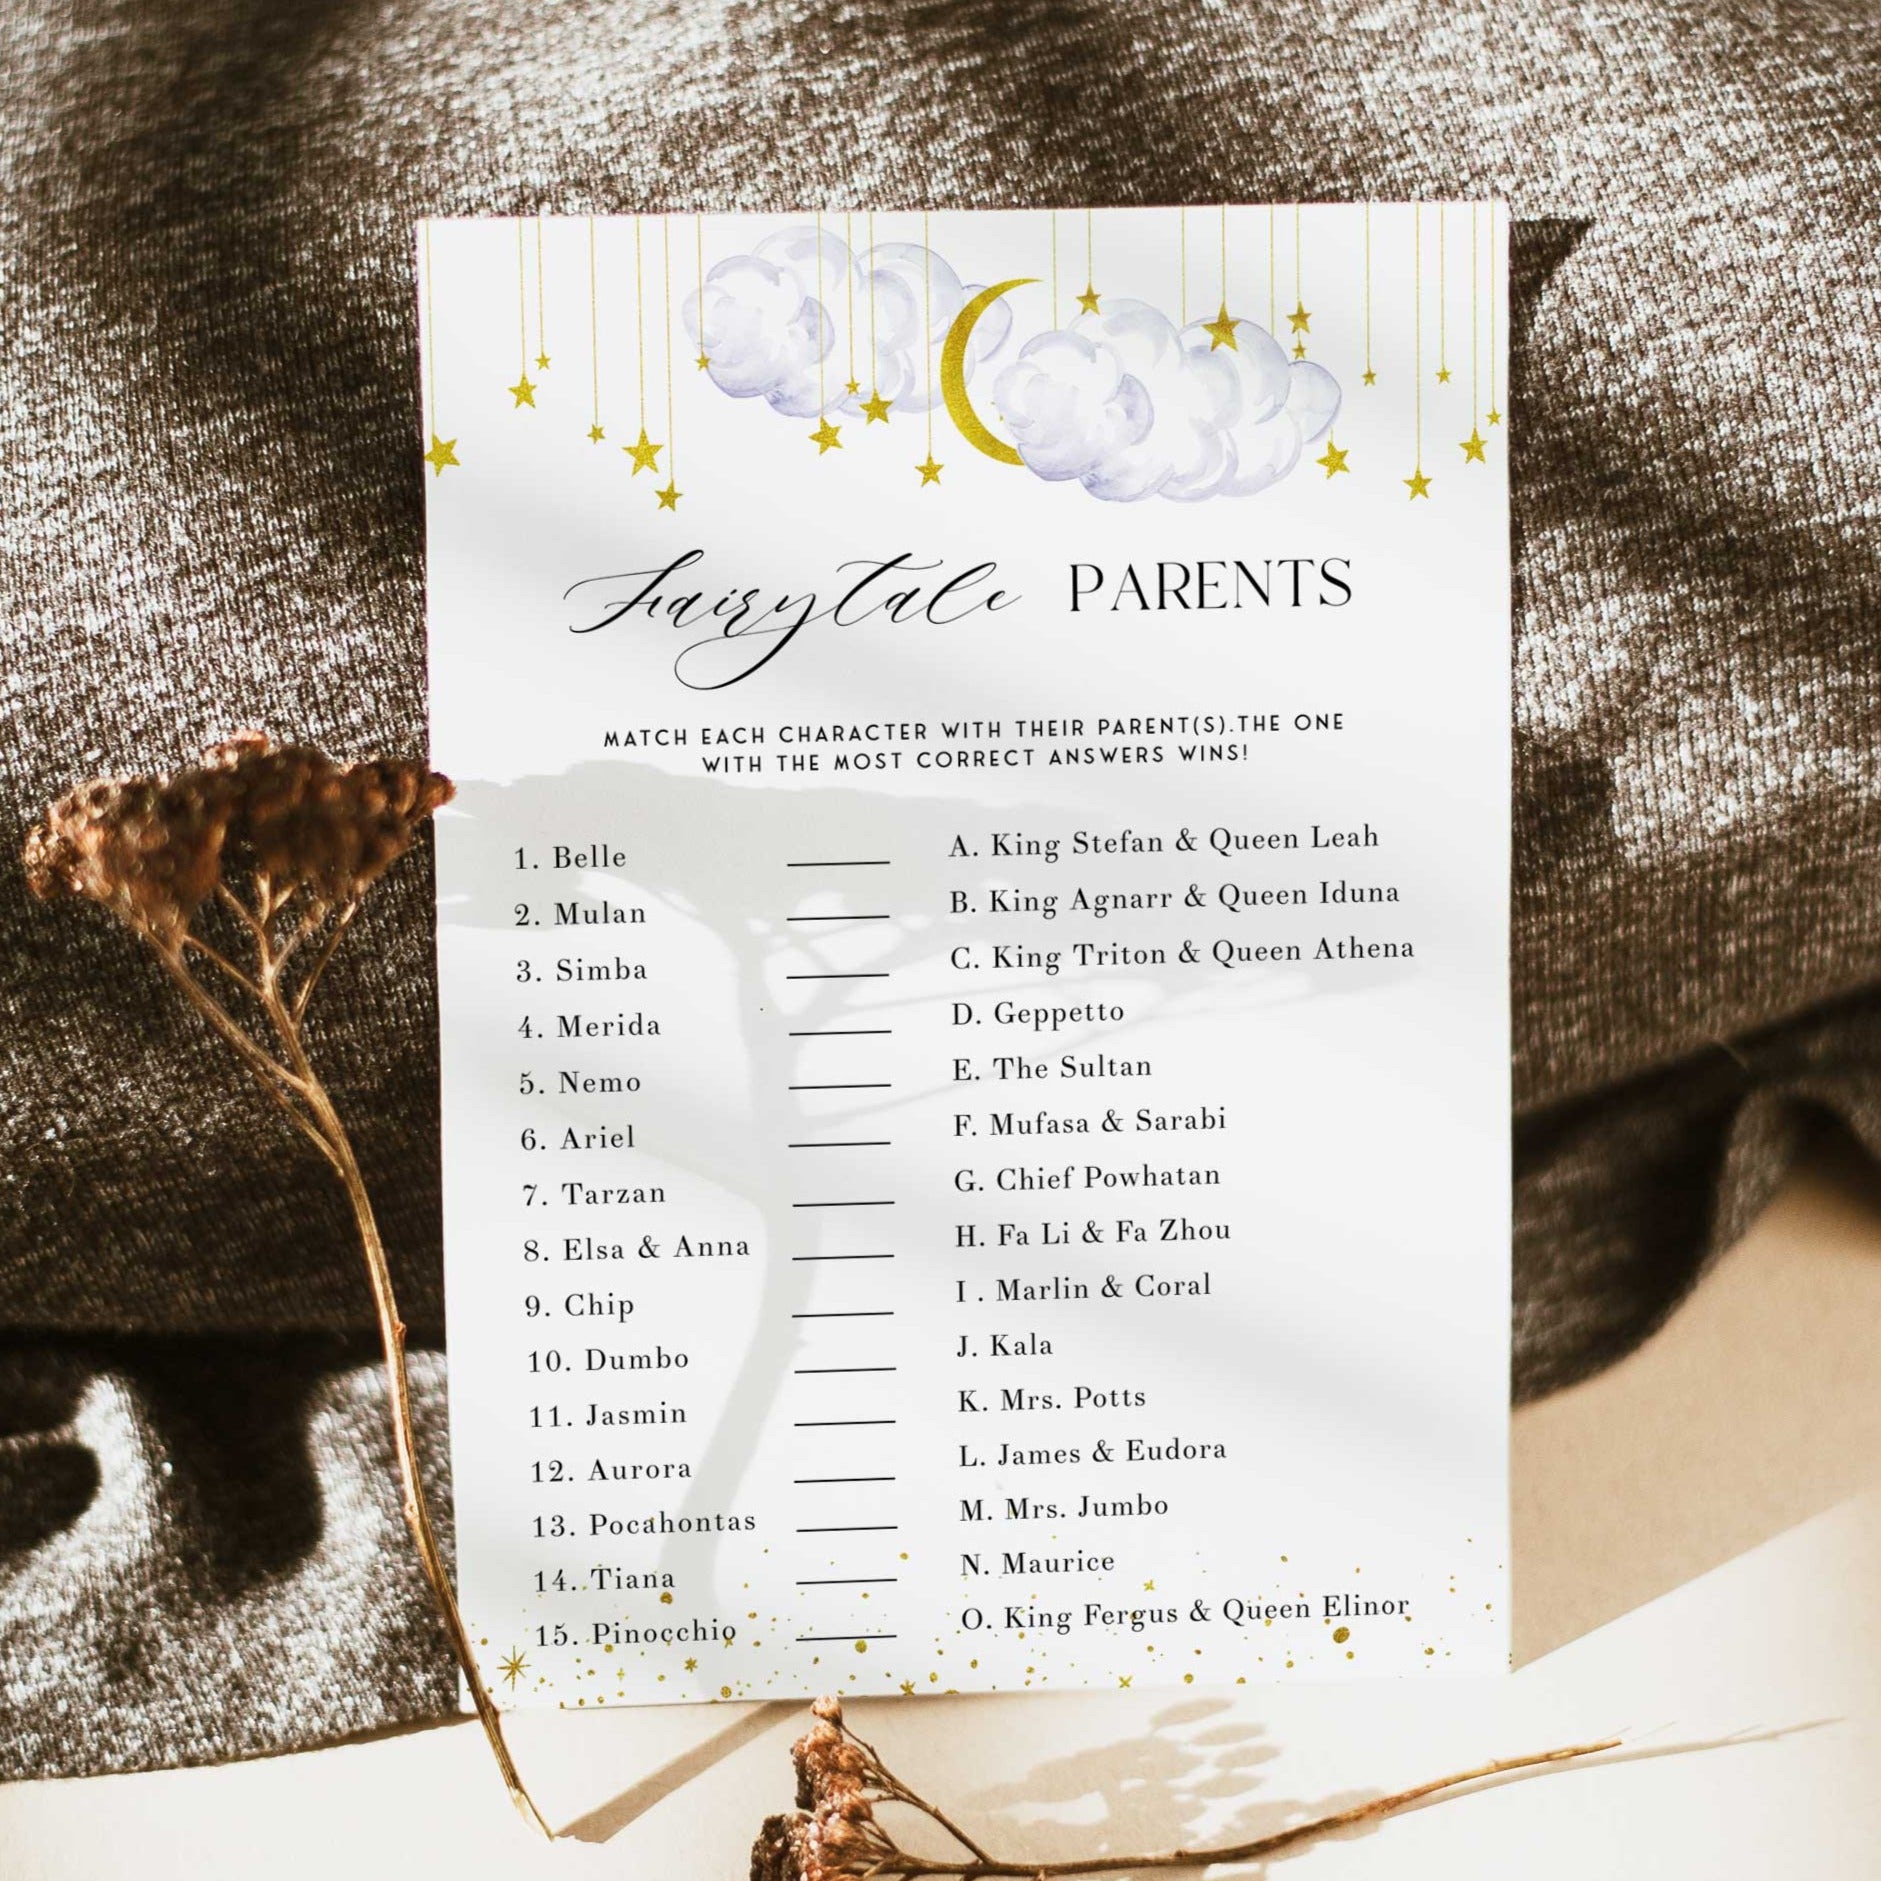 Fully editable and printable baby shower fairytale parents game with a little star design. Perfect for a Twinkle Little Star baby shower themed party